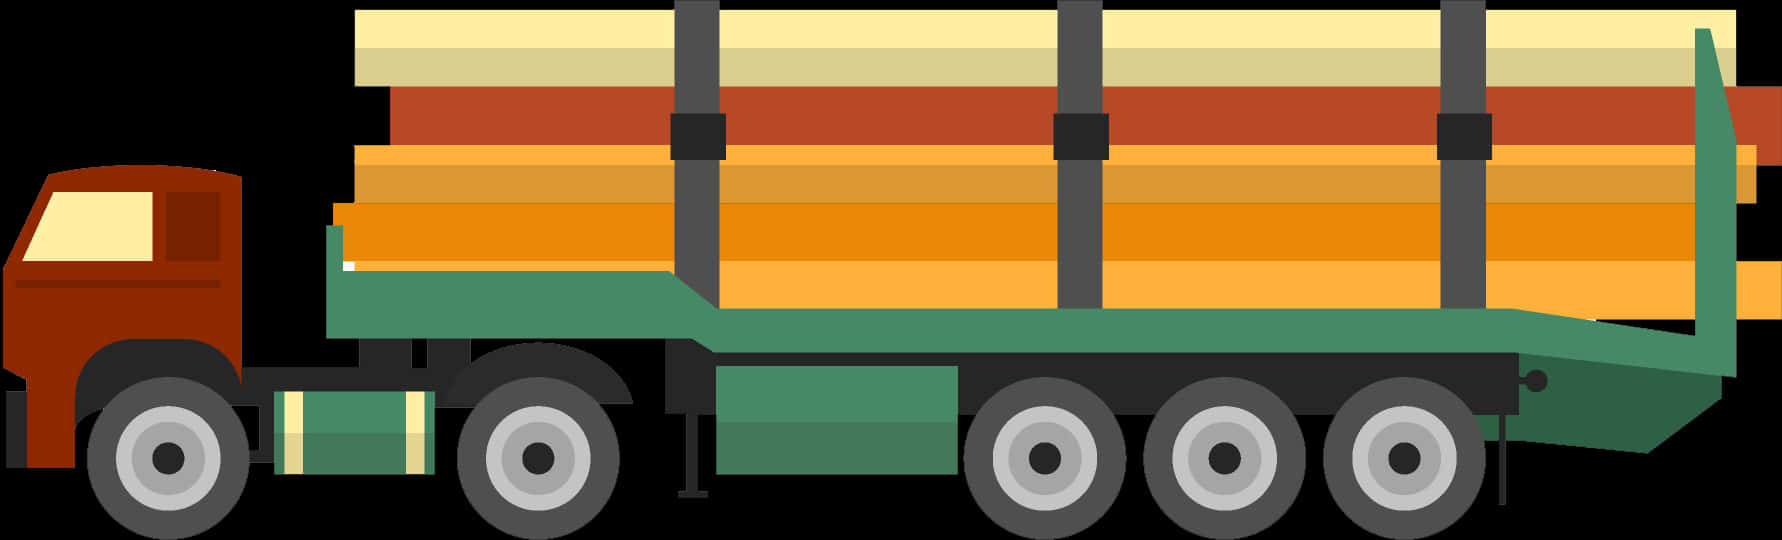 Flatbed Truck Loaded With Lumber Vector PNG